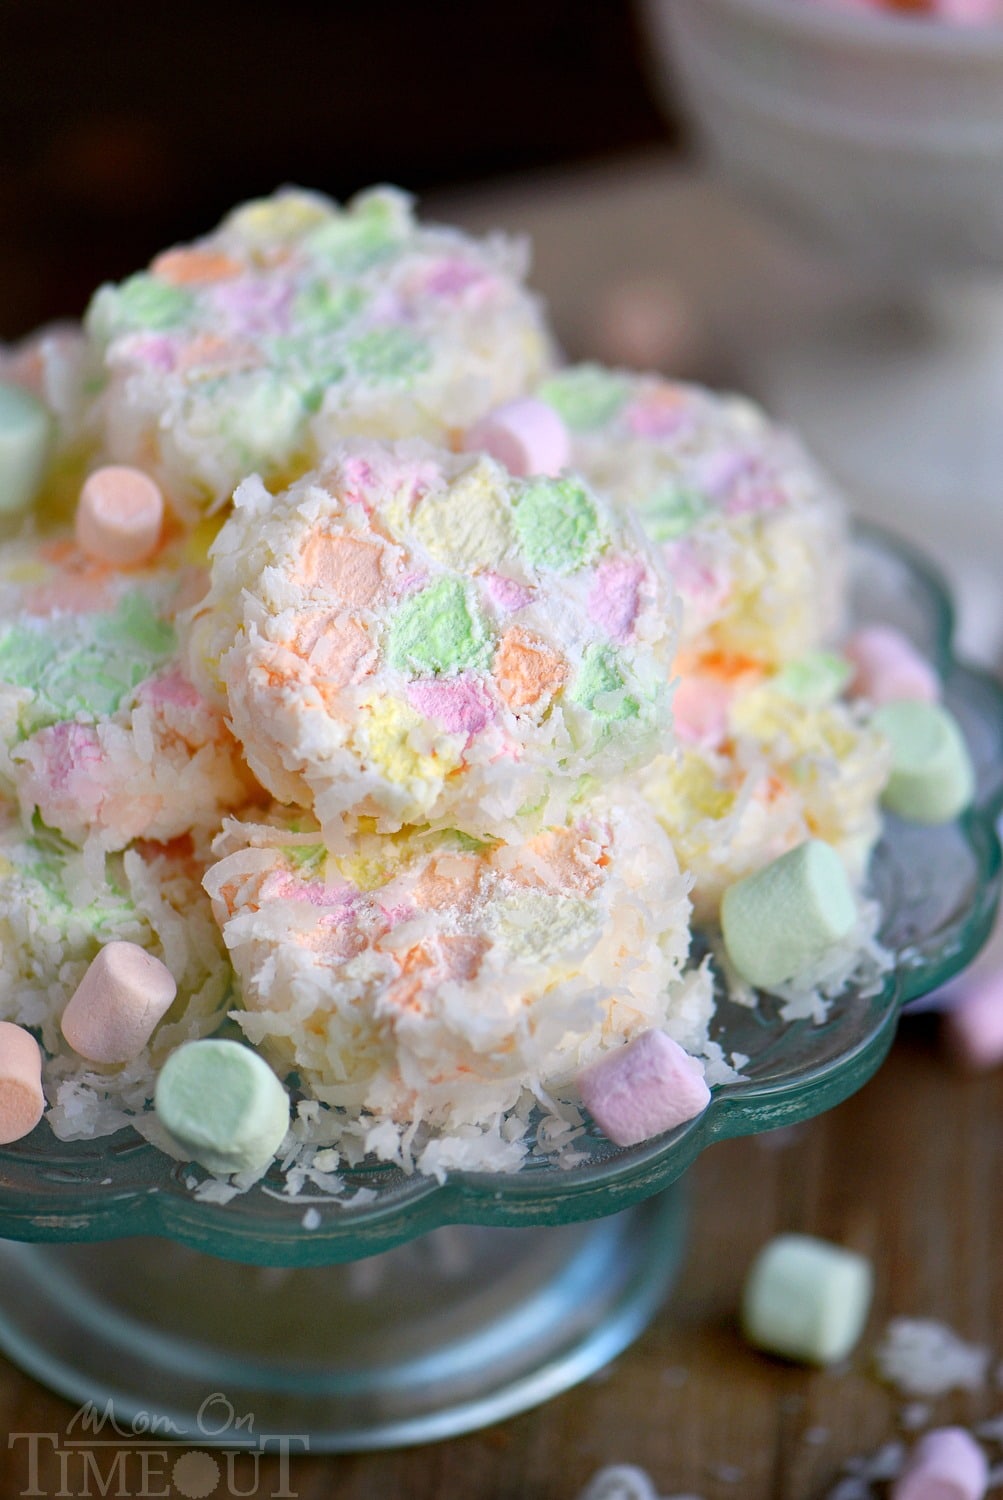 This Easter Cathedral Candy recipe requires only three ingredients and is so pretty! Great for Easter, baby showers, and other parties! Kids love to help with this easy recipe! // Mom On Timeout